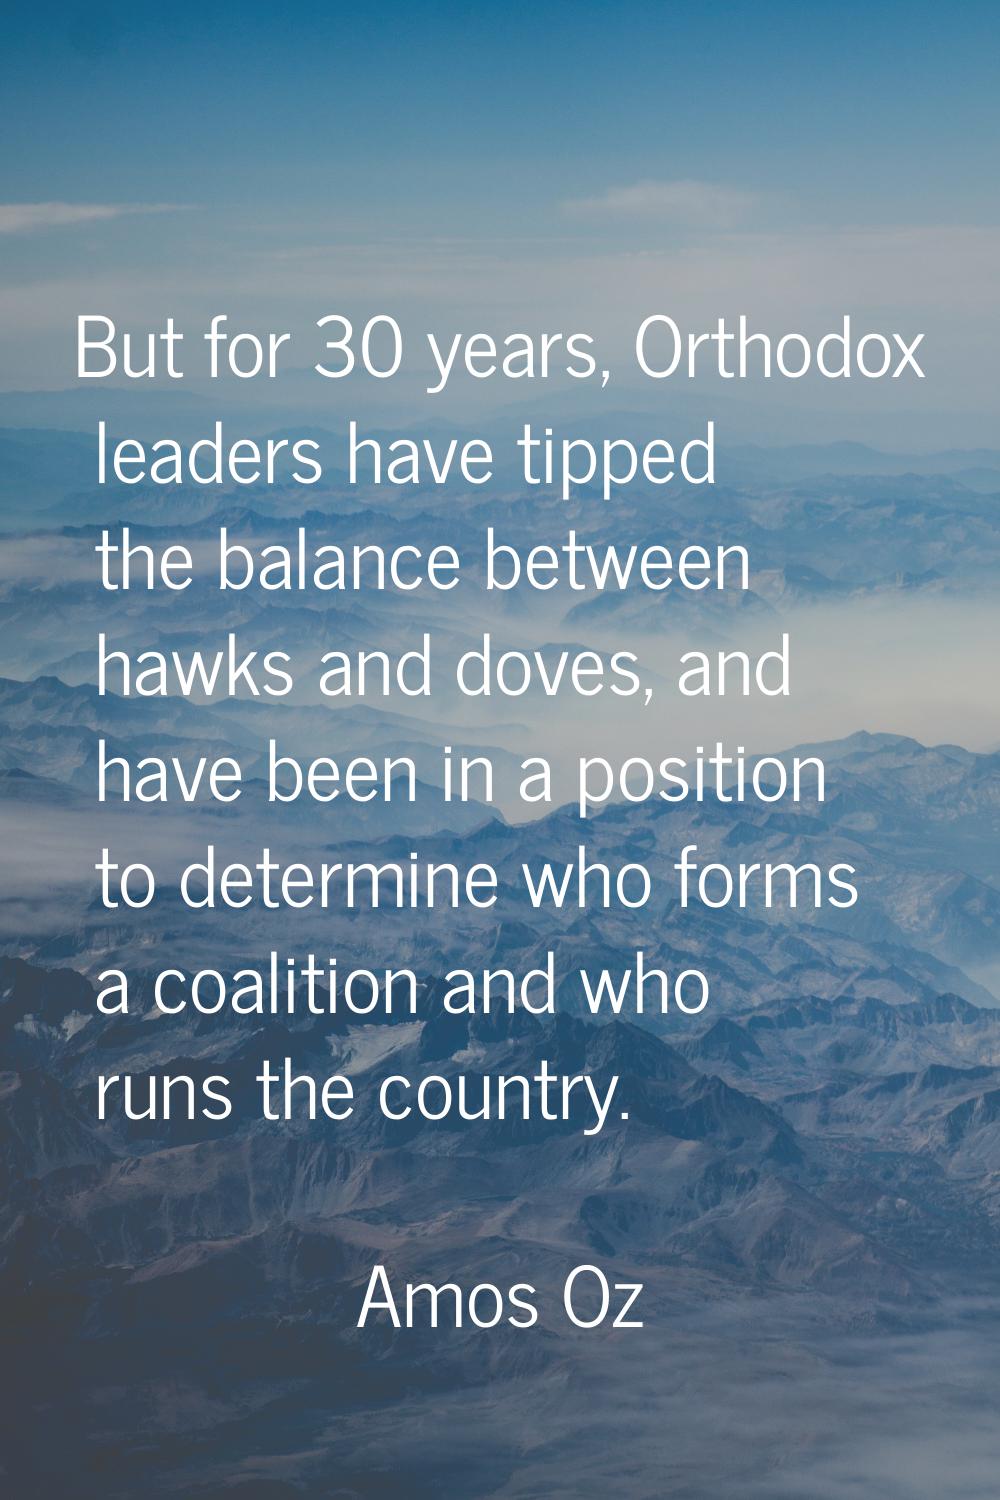 But for 30 years, Orthodox leaders have tipped the balance between hawks and doves, and have been i